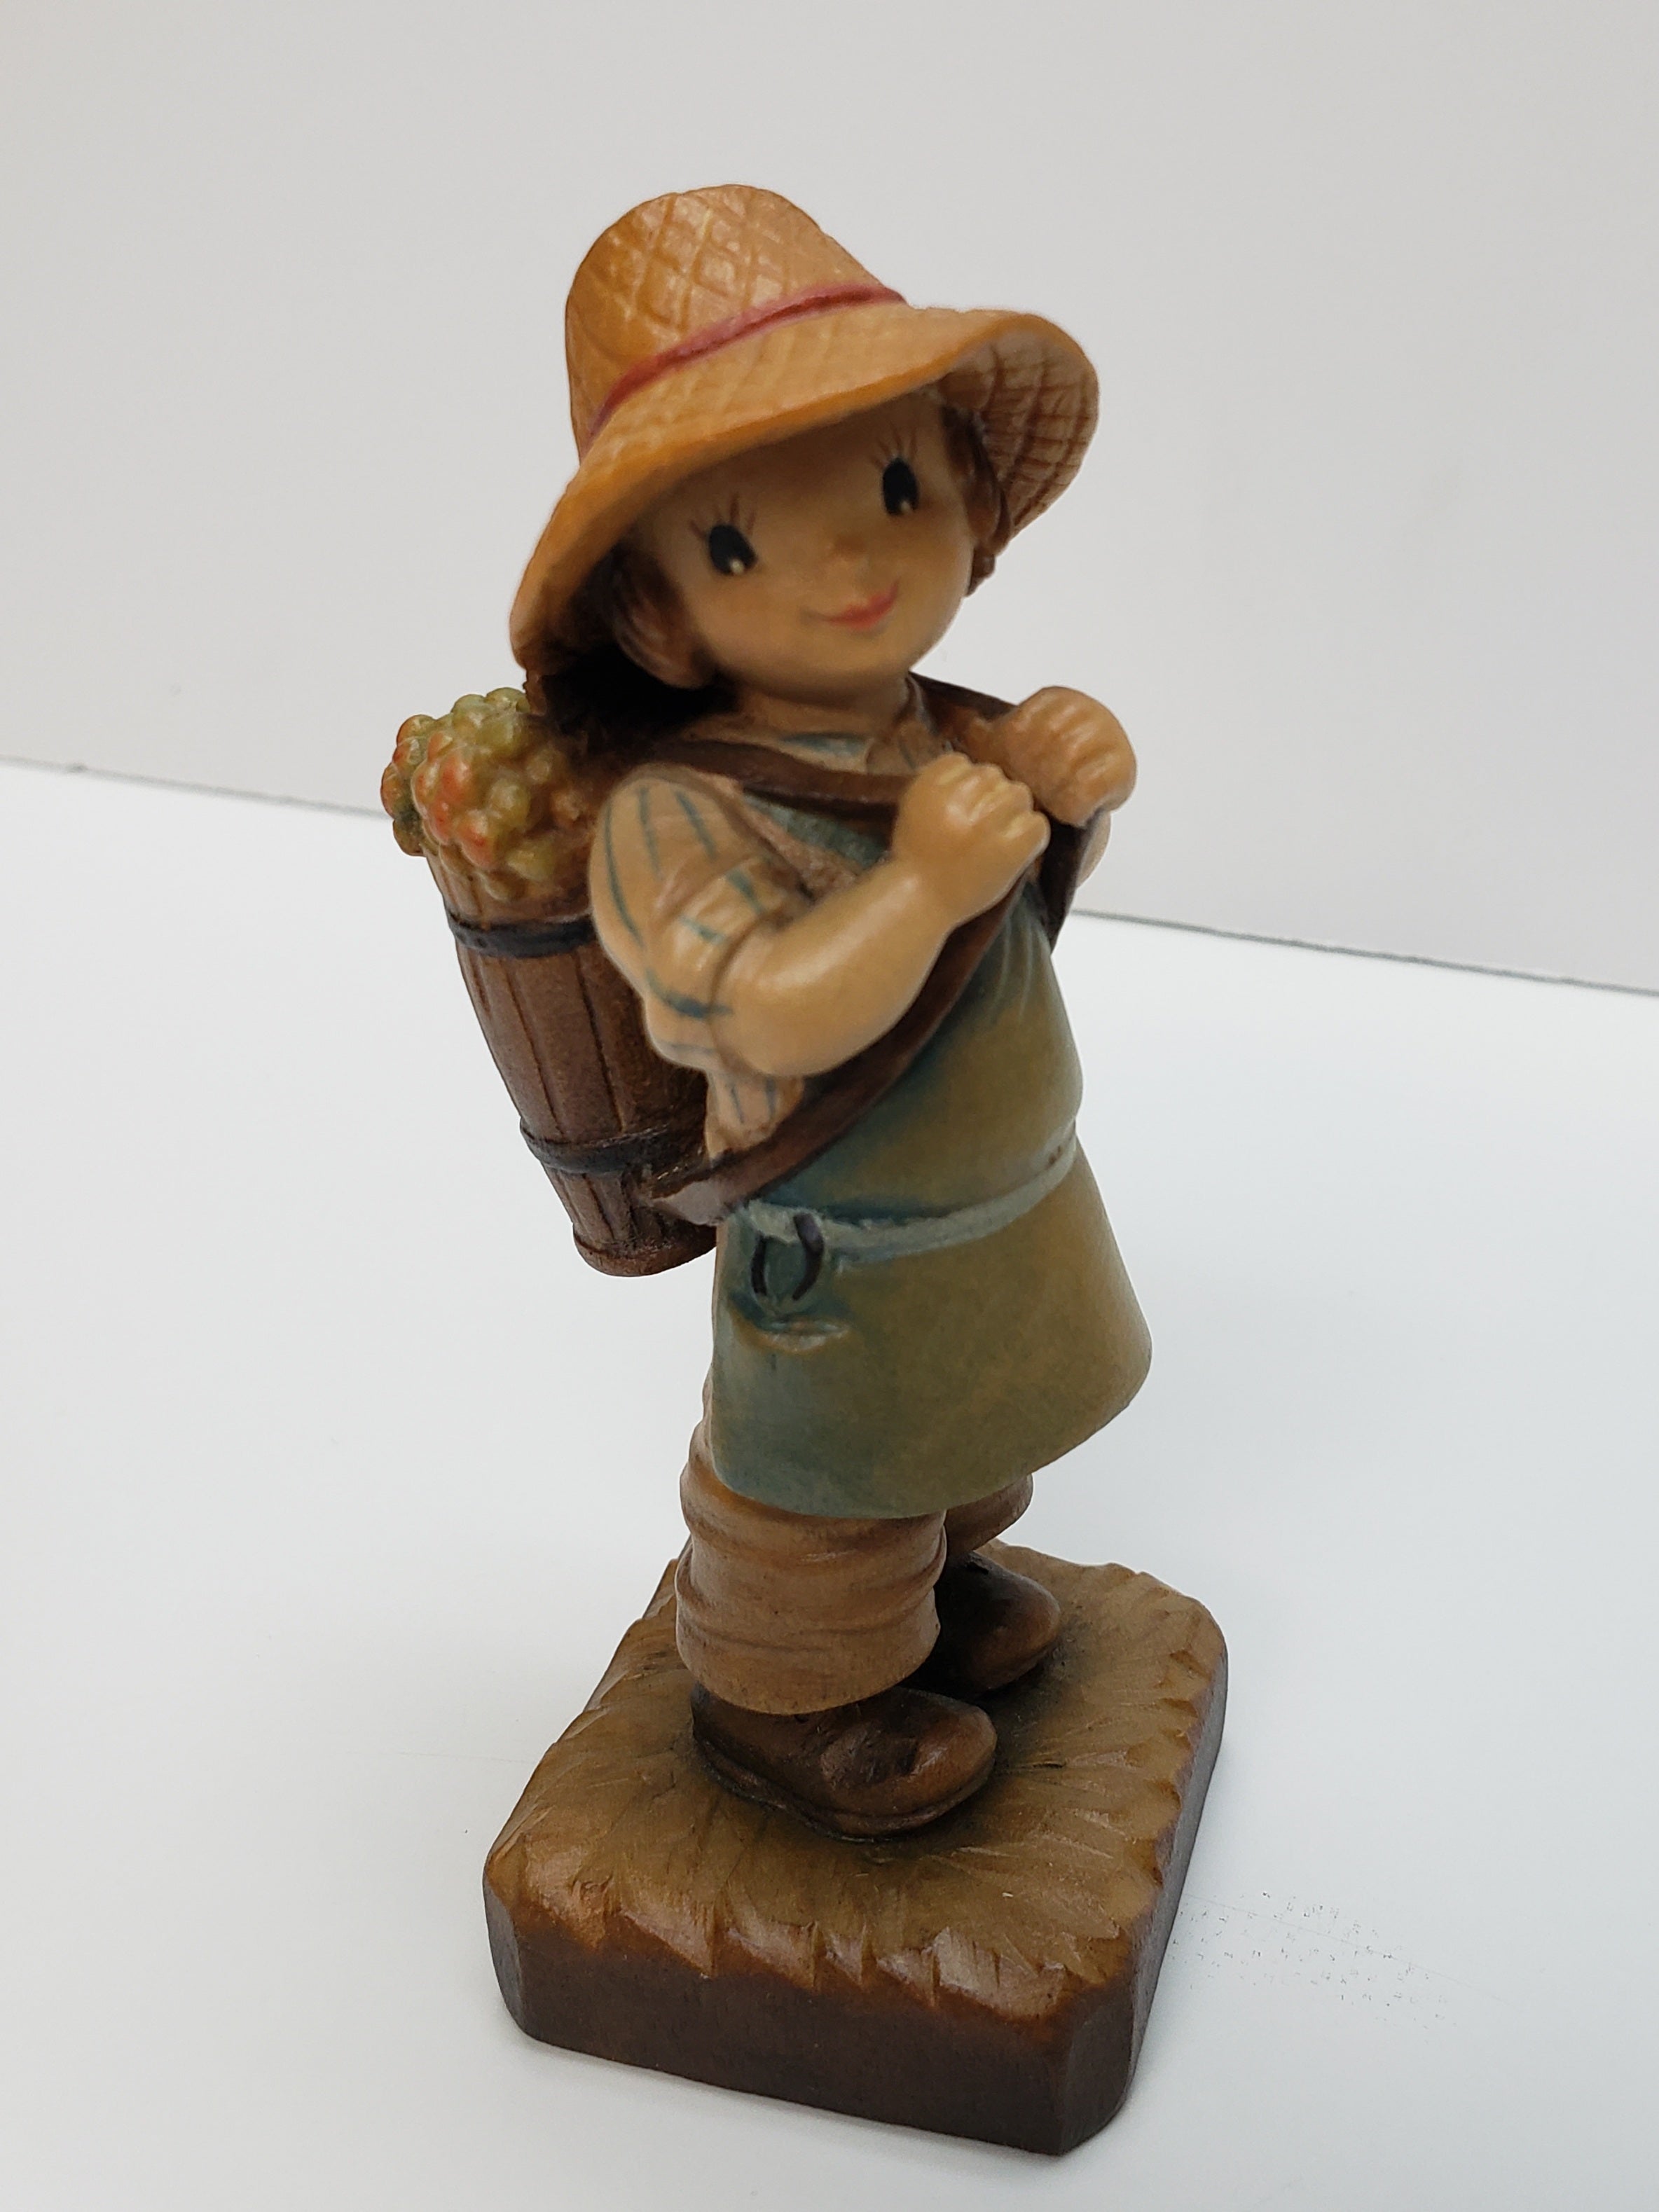 Anri Collection Figurines - Wood Carvings - Made in Italy